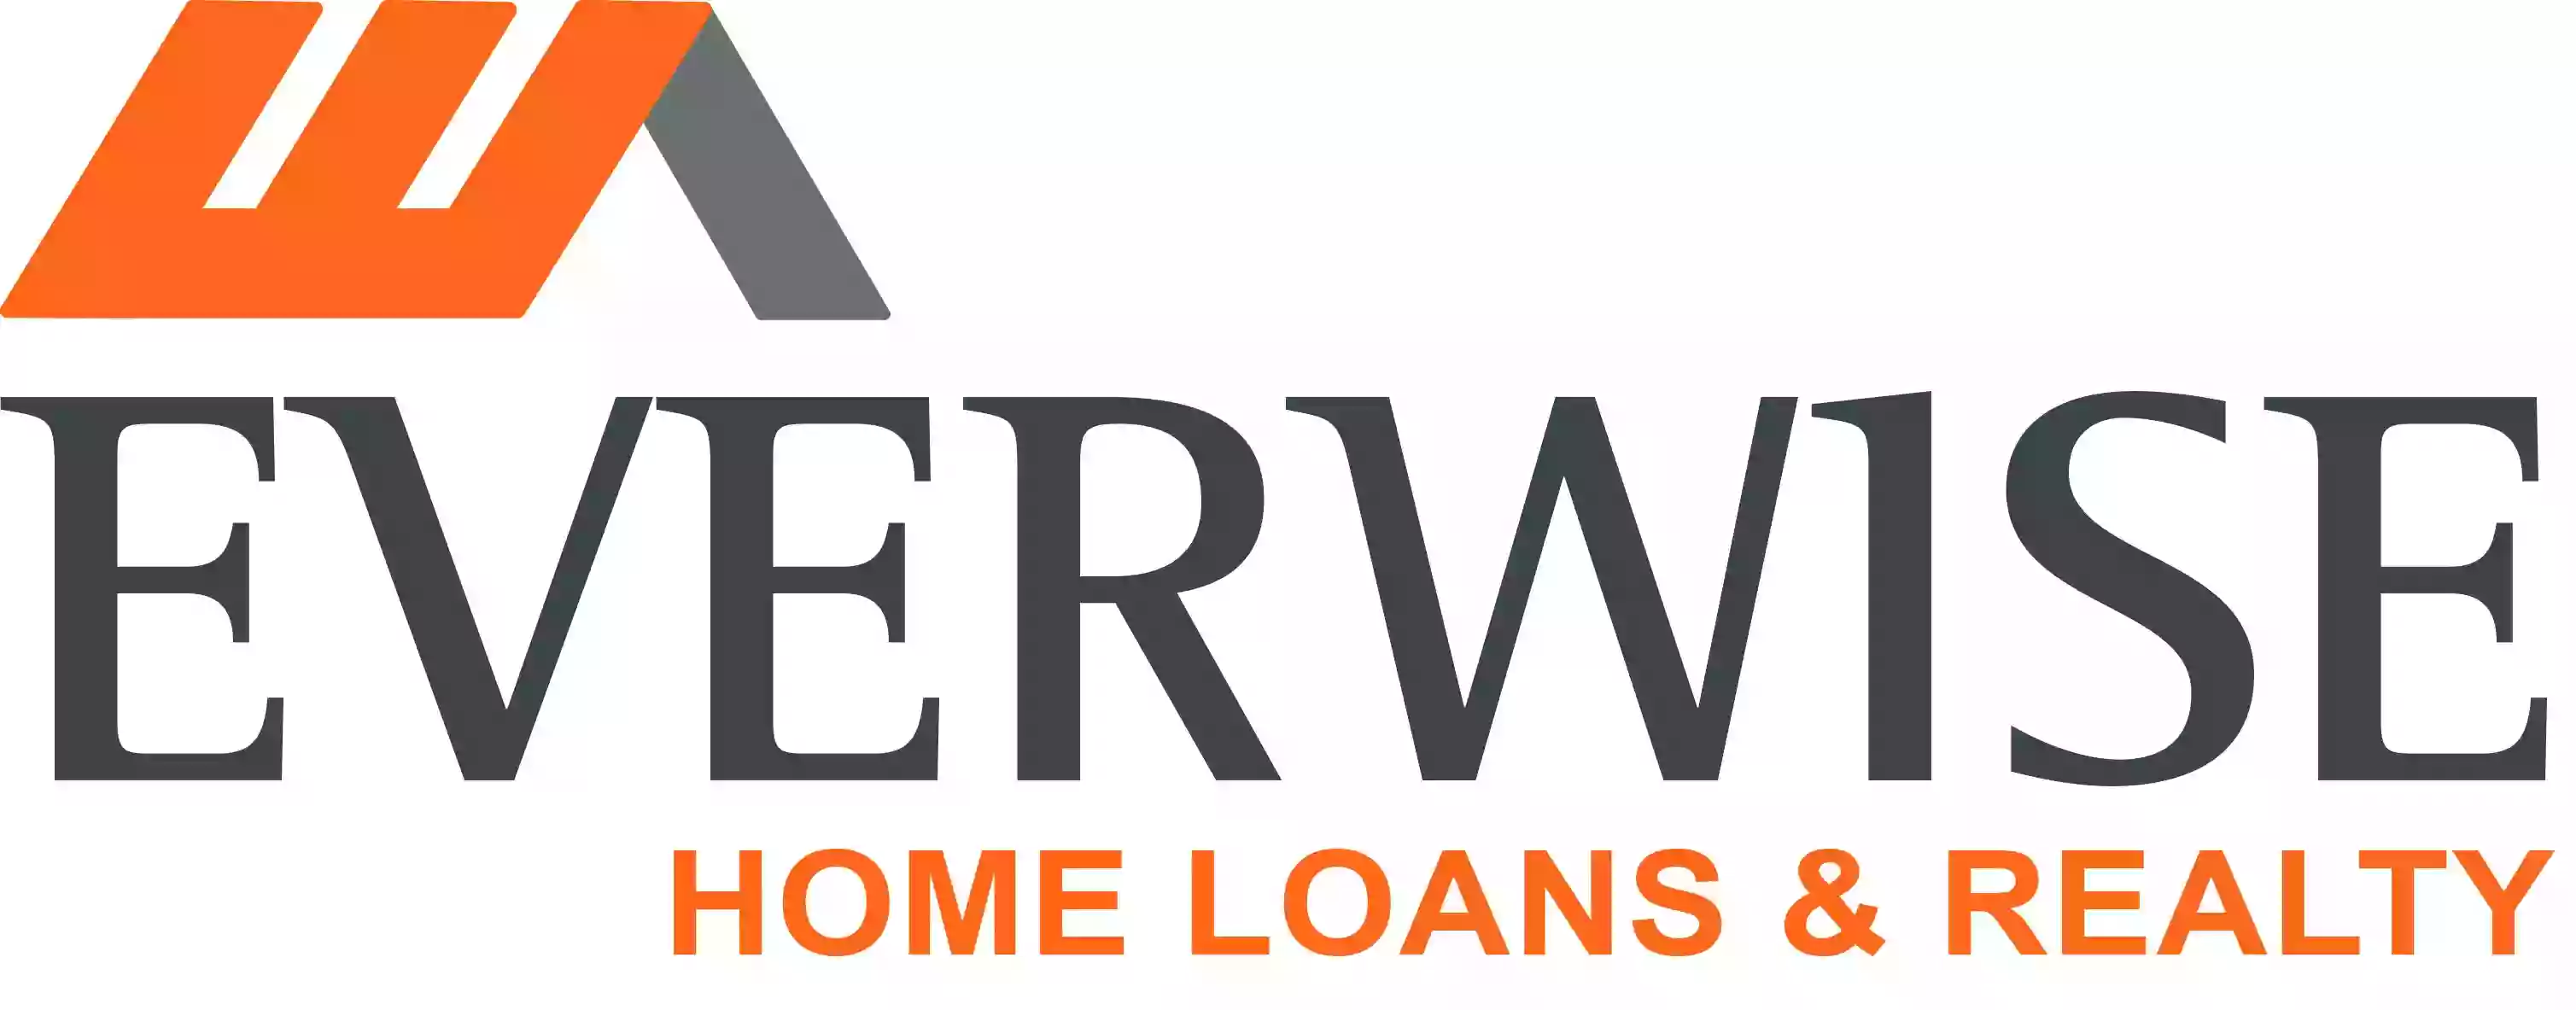 Everwise Home Loans & Realty